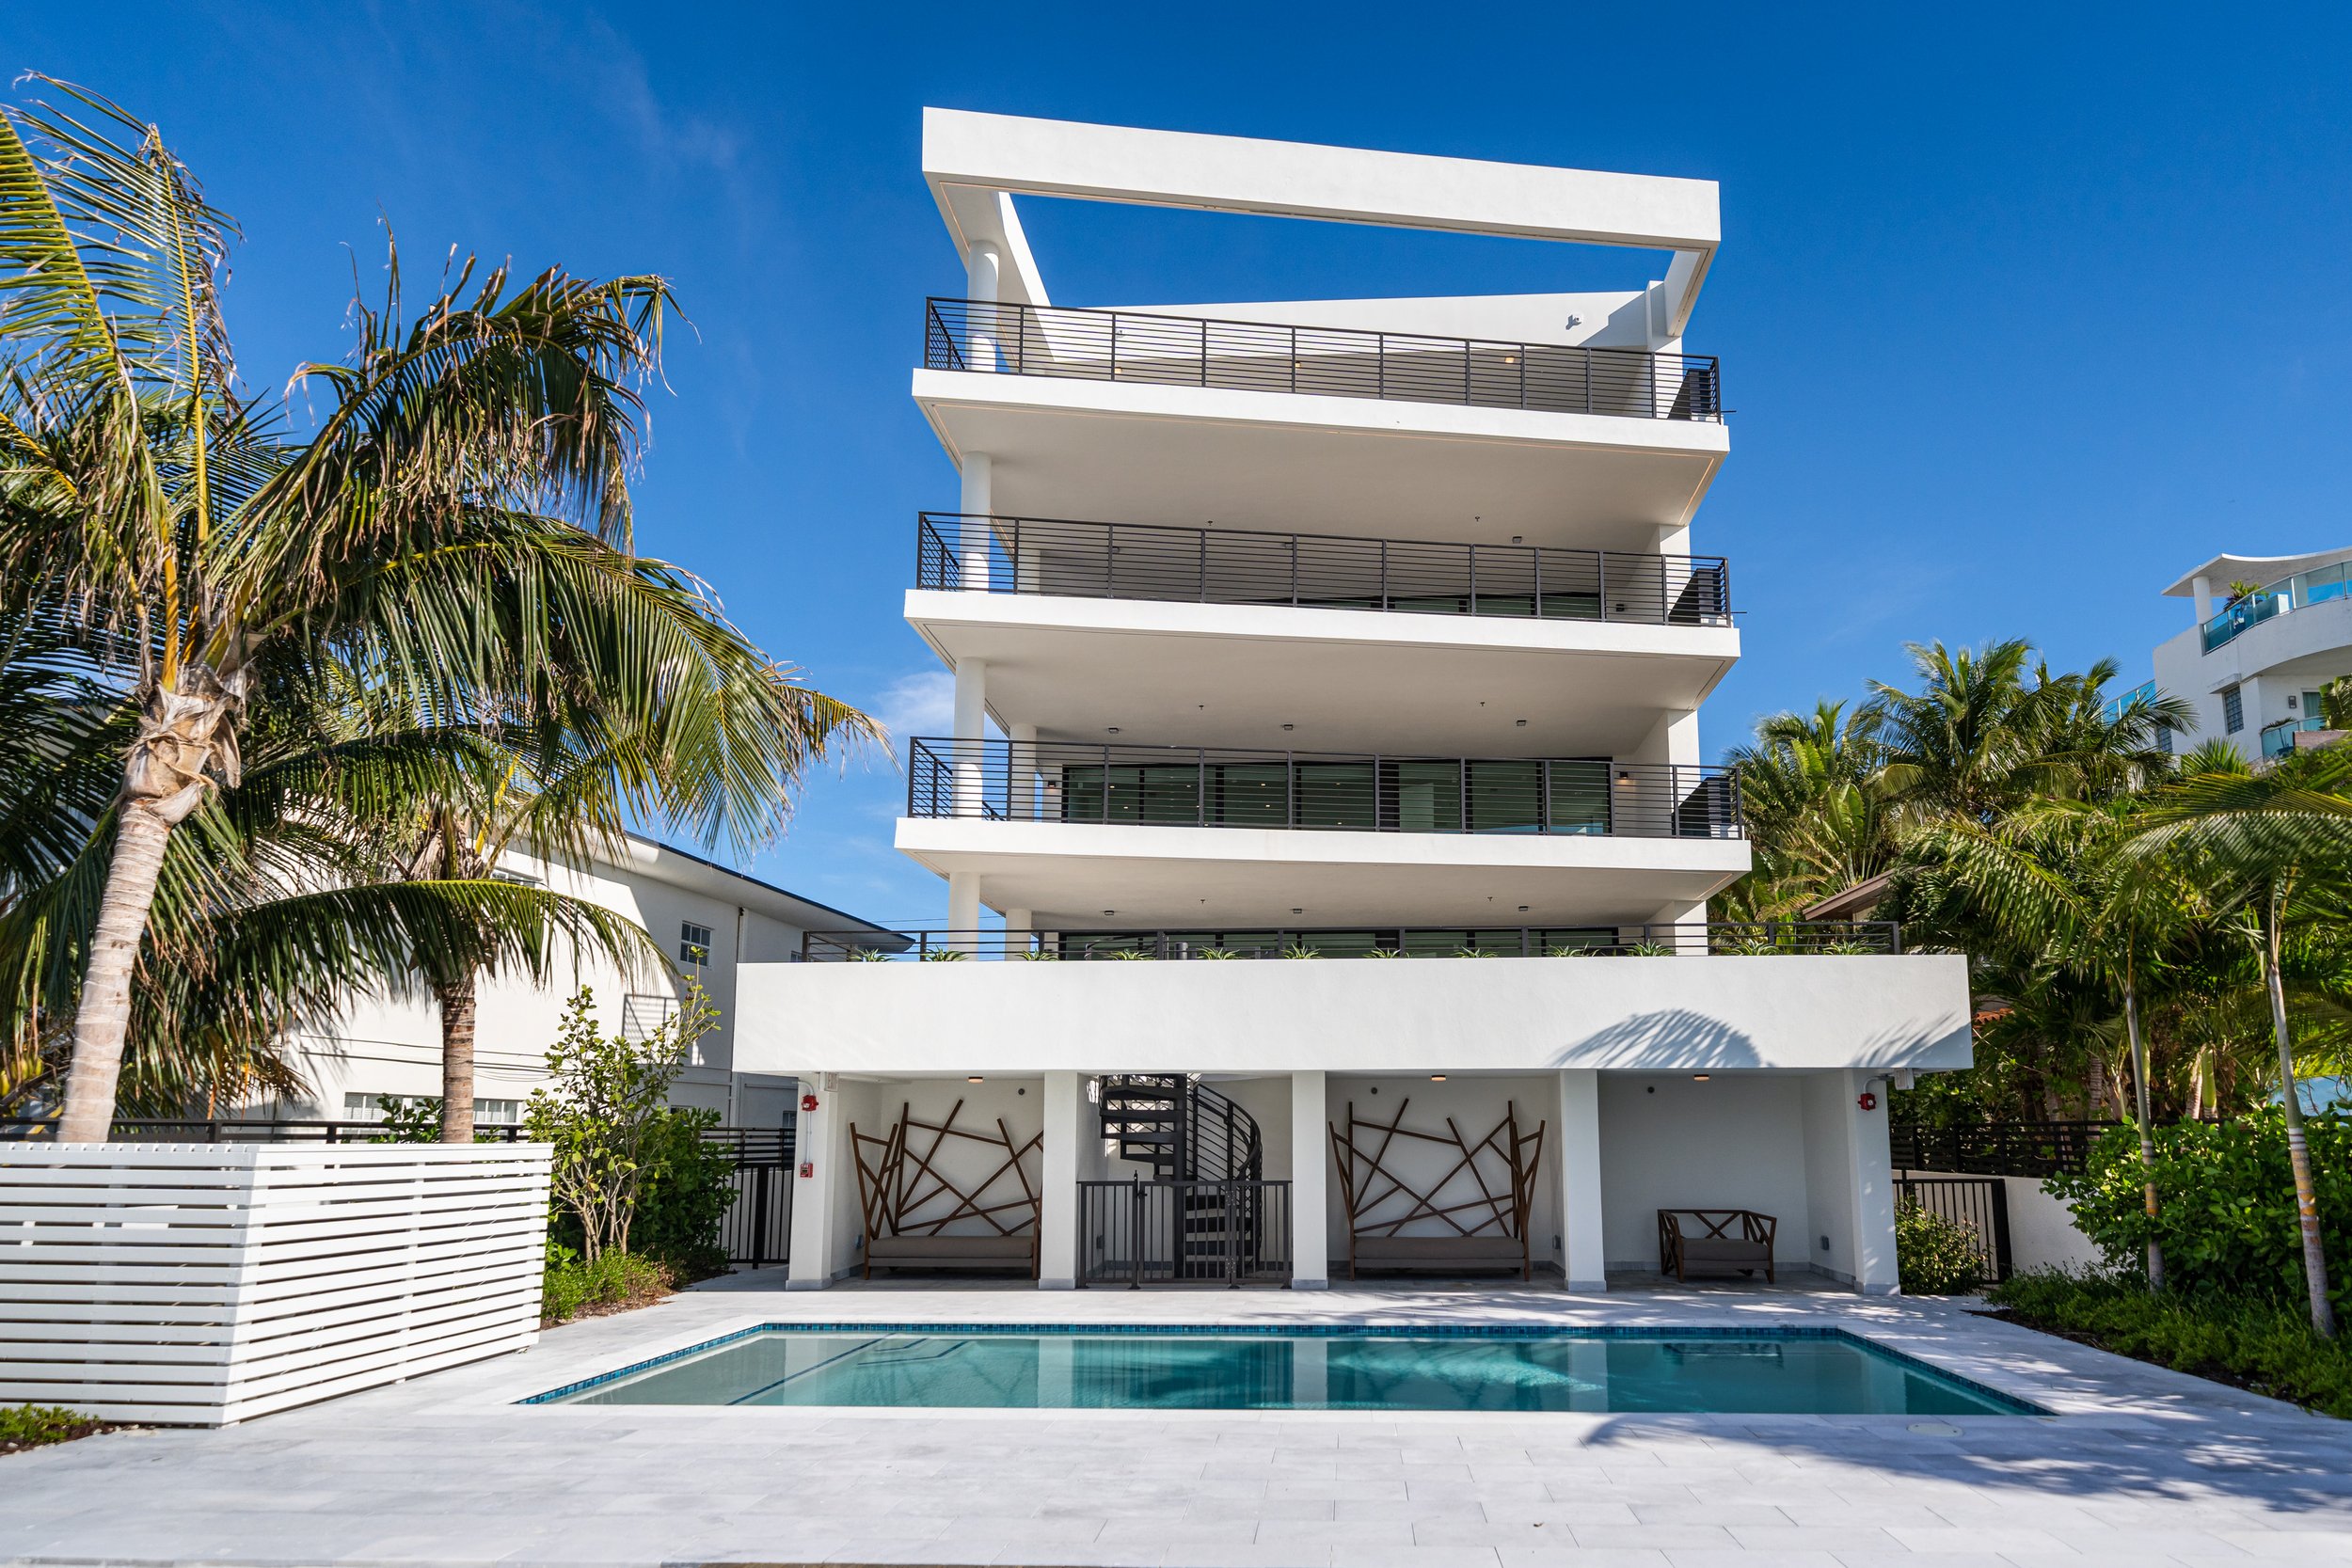 Sabal Development Sells Newly Constructed Luxury Waterfront Apartment Building On Miami Beach's Isle of Normandy 15.jpg